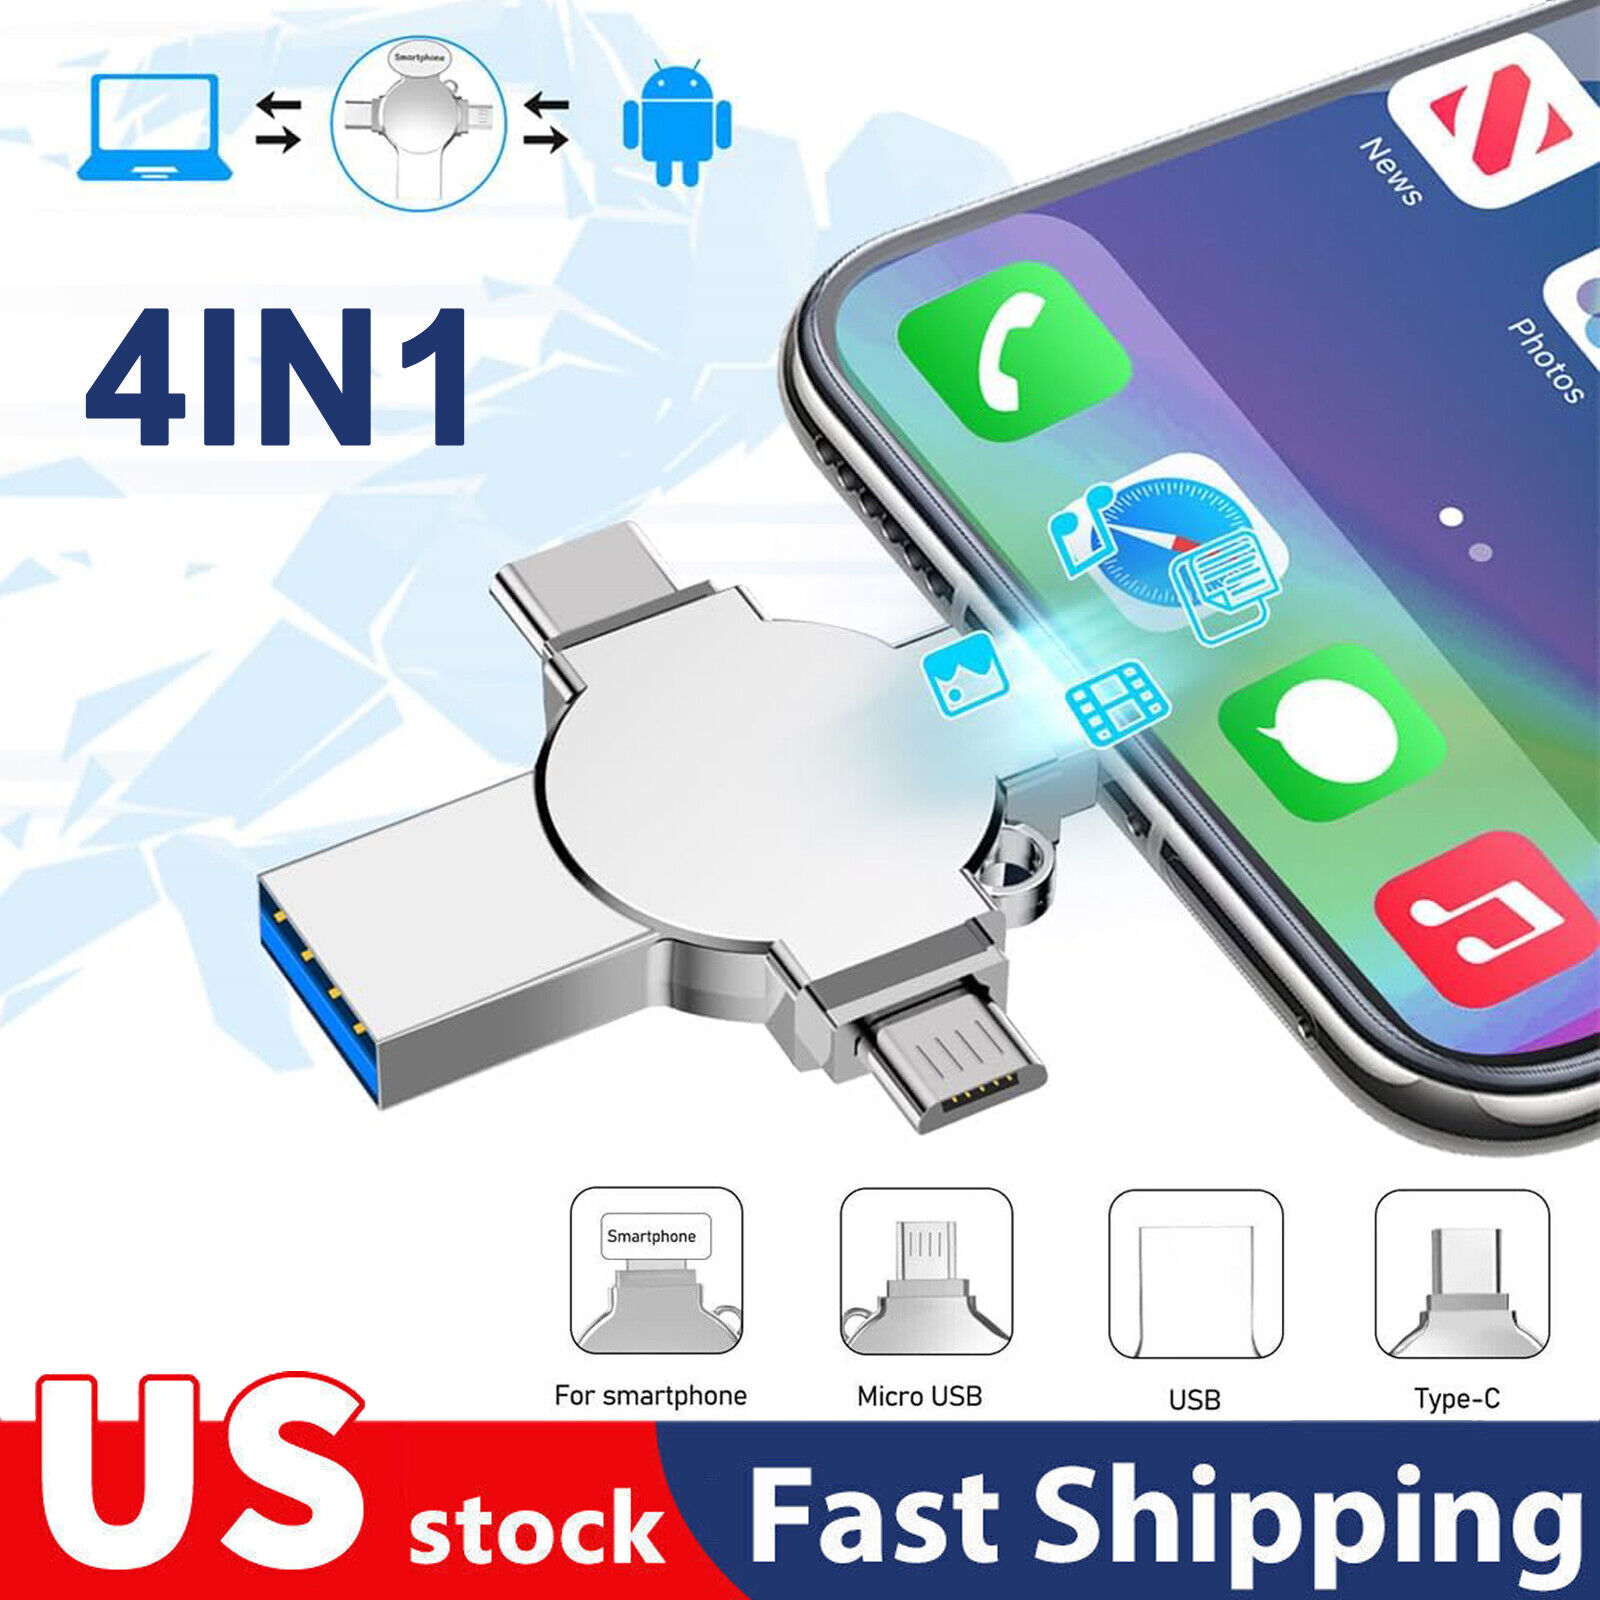 4in1 USB 3.0 Flash Drive 2TB Memory Photo Stick For iPhone iPad Android Type C